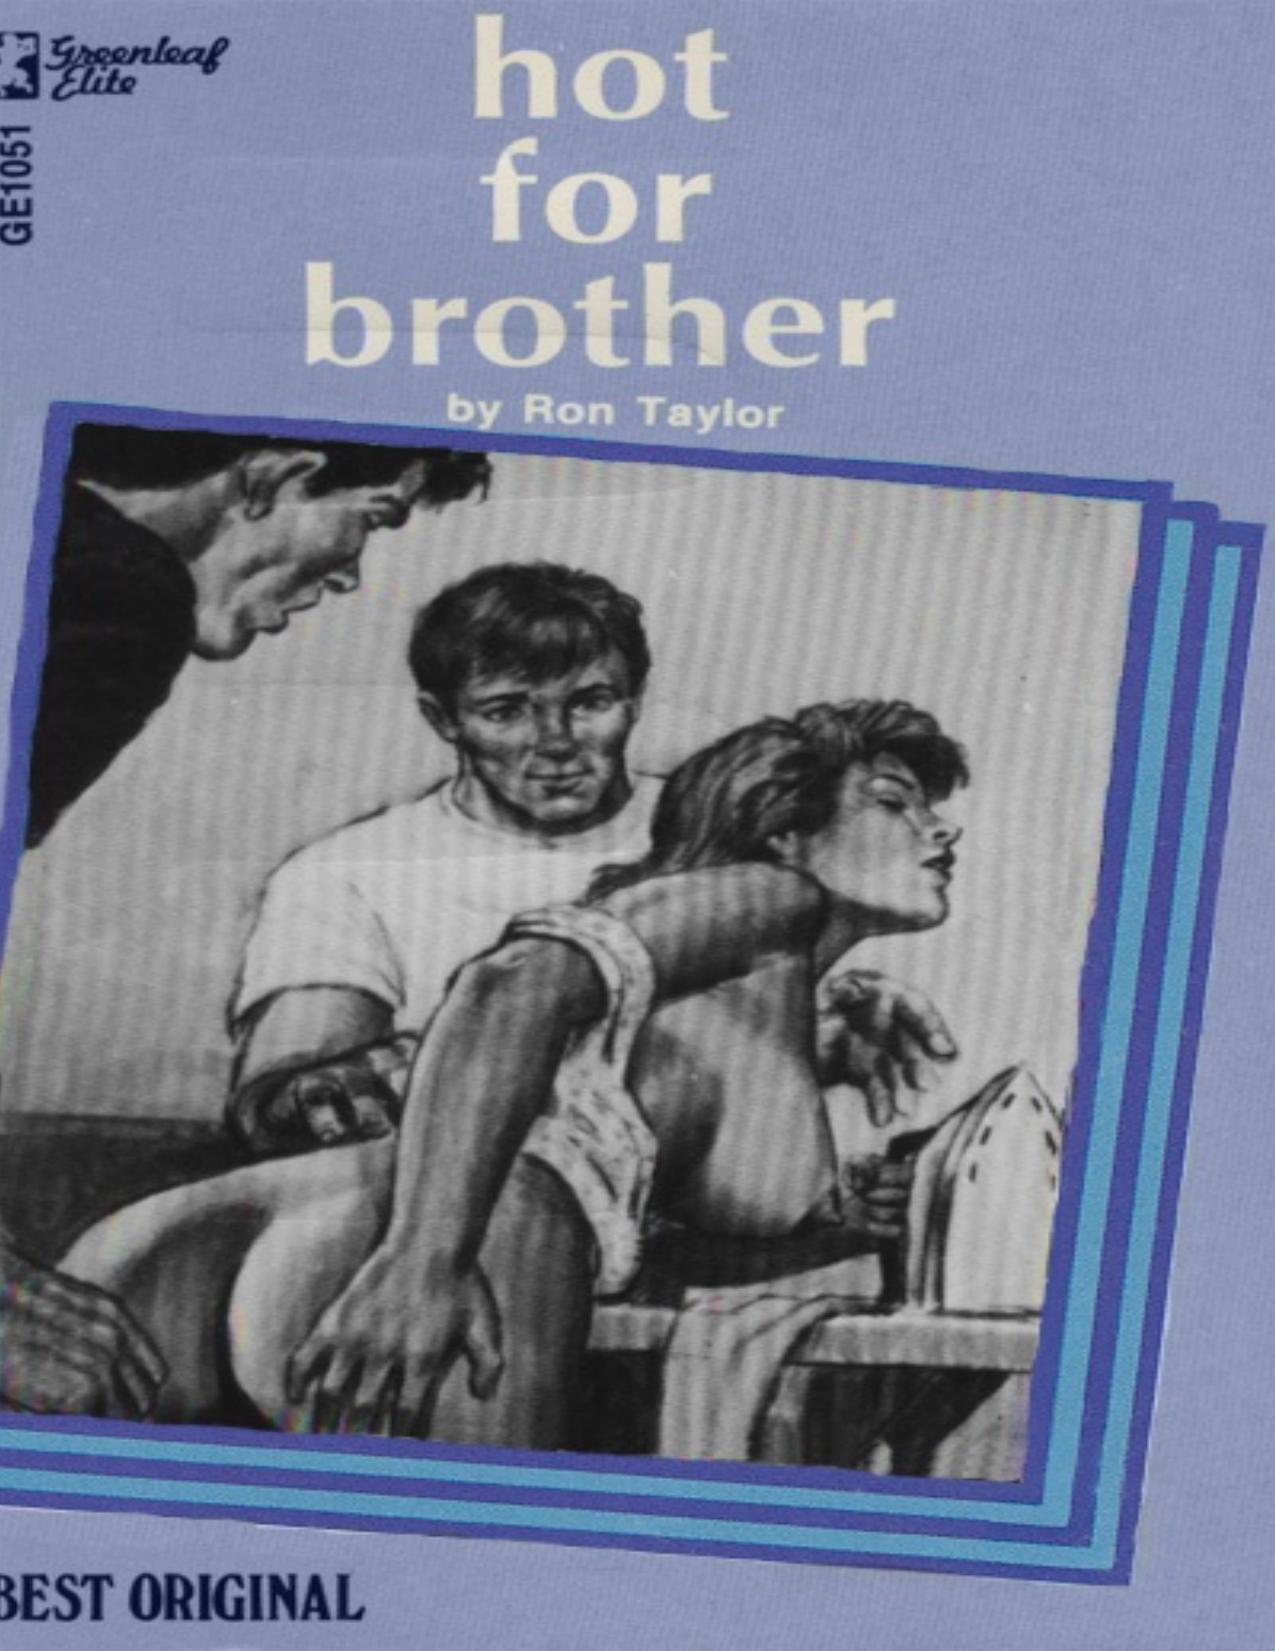 Hot For Brother by Ron Taylor